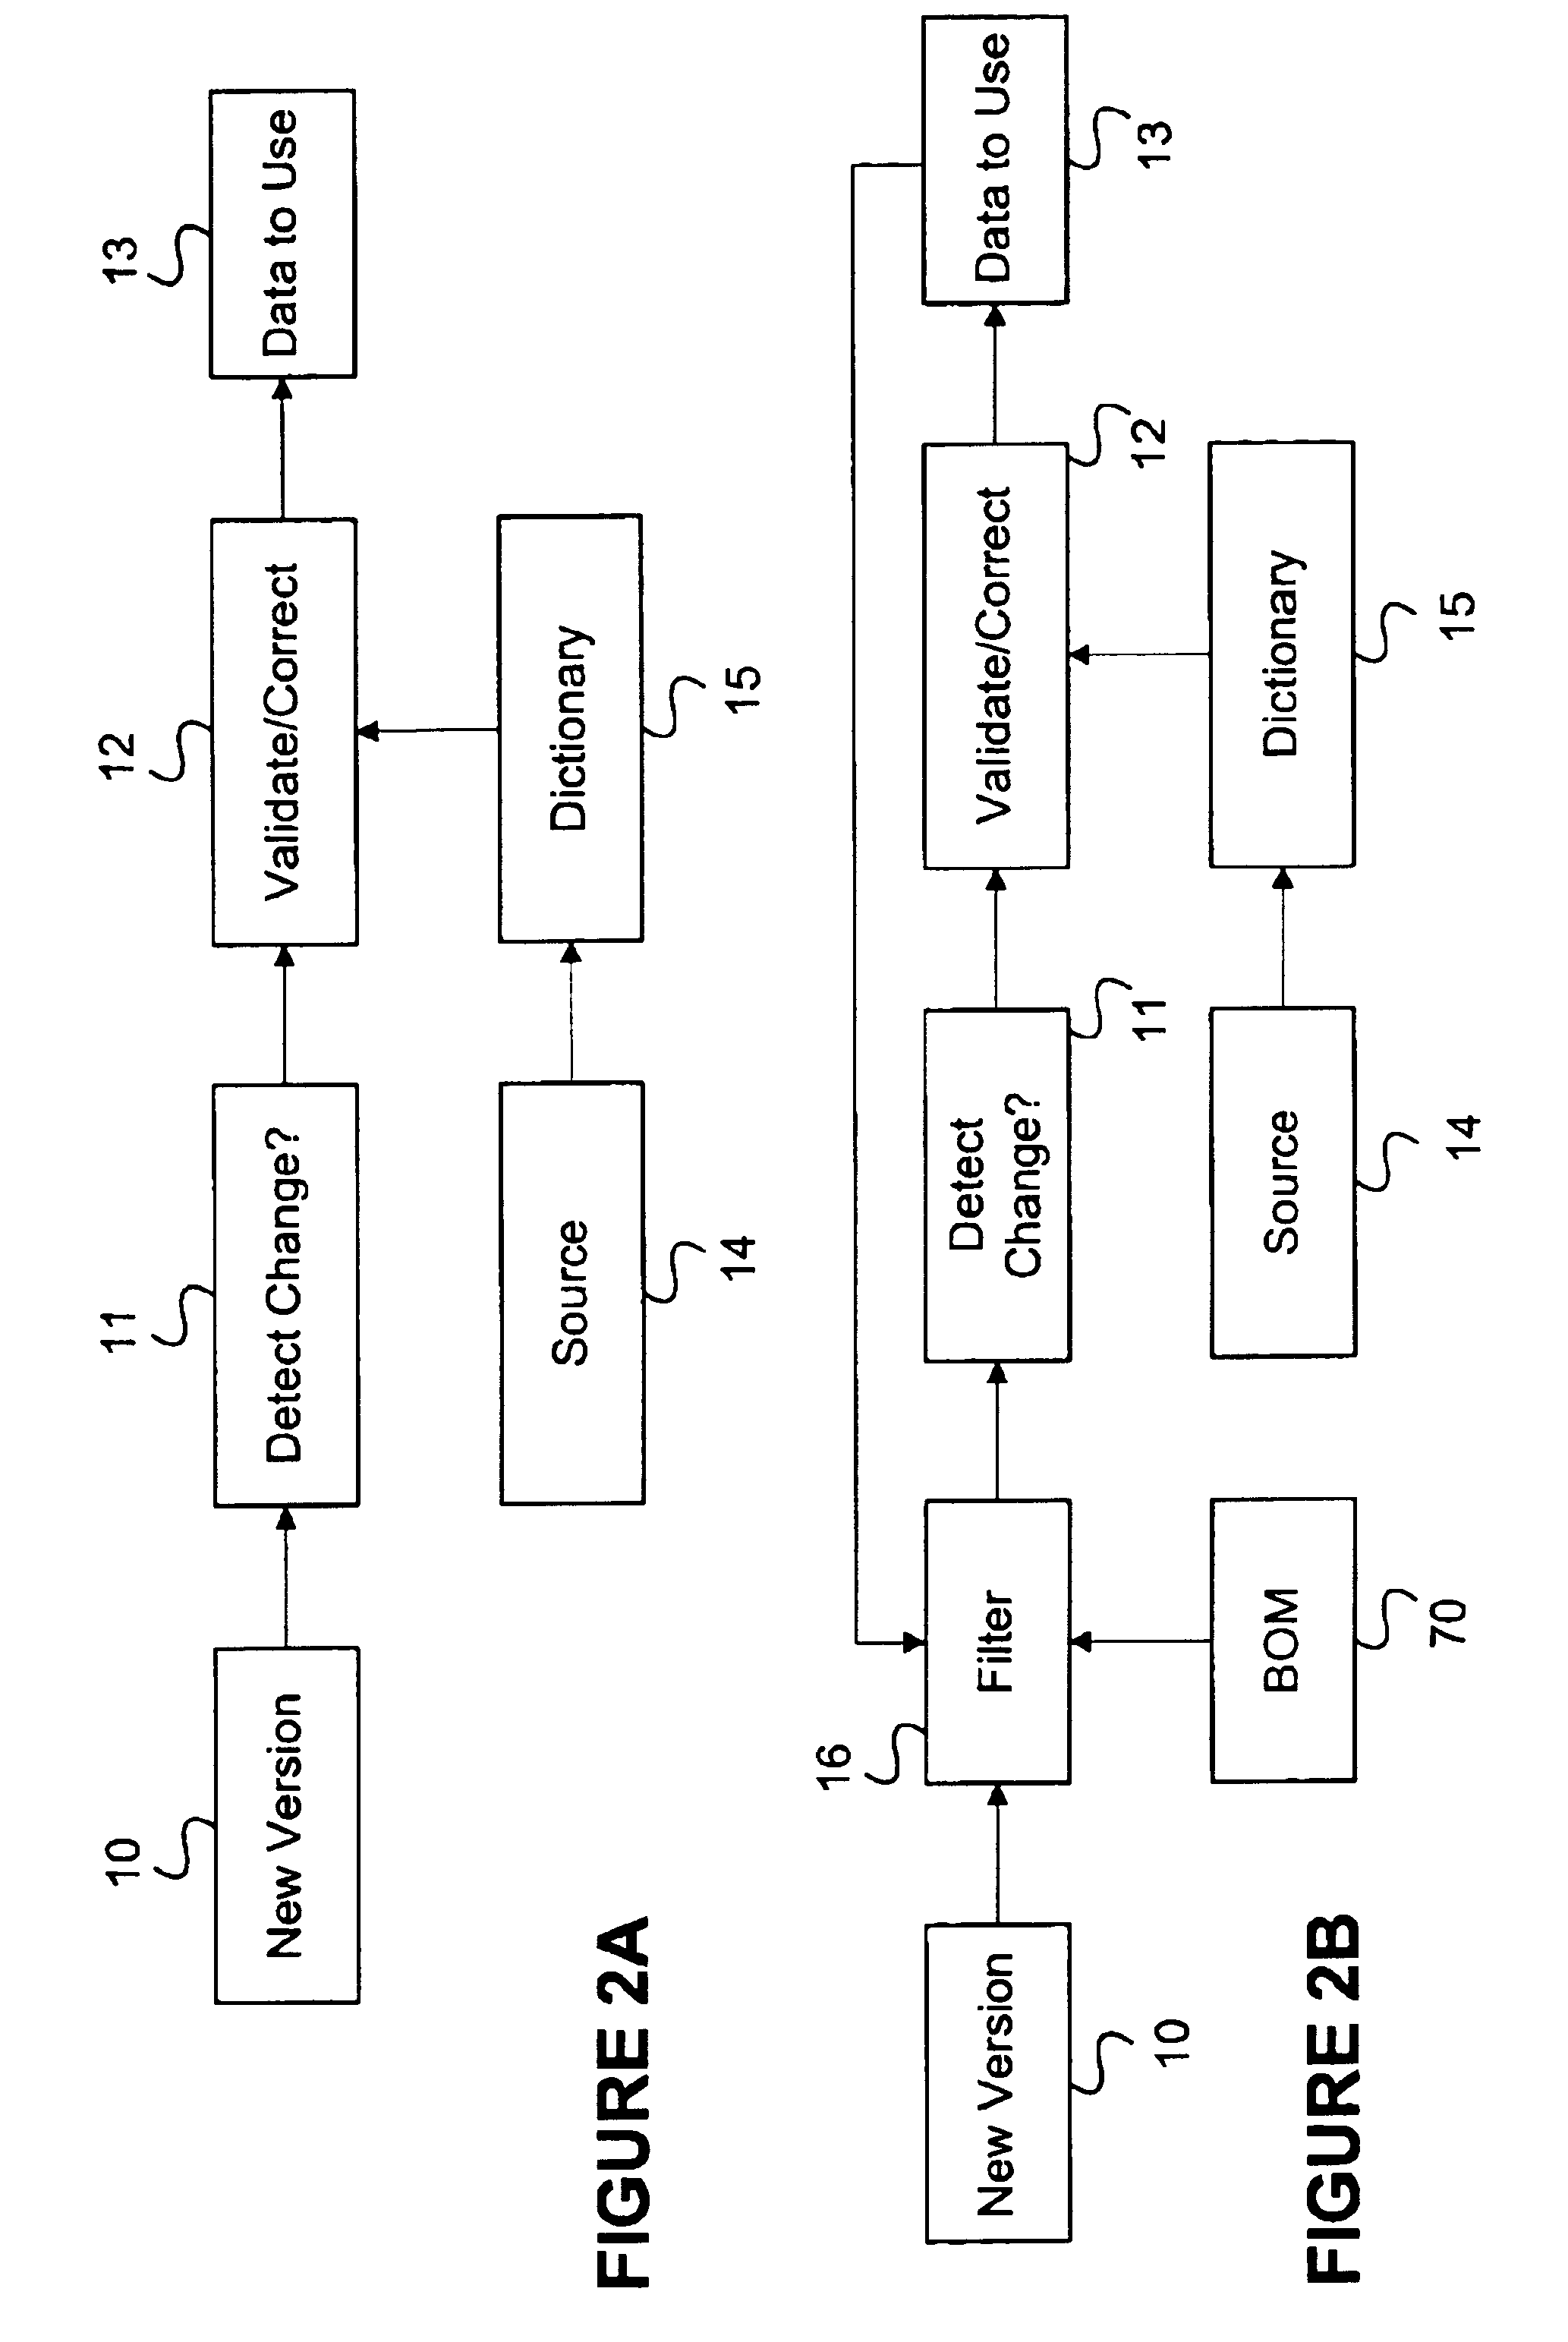 Systems and methods for organizing and validating data in documents